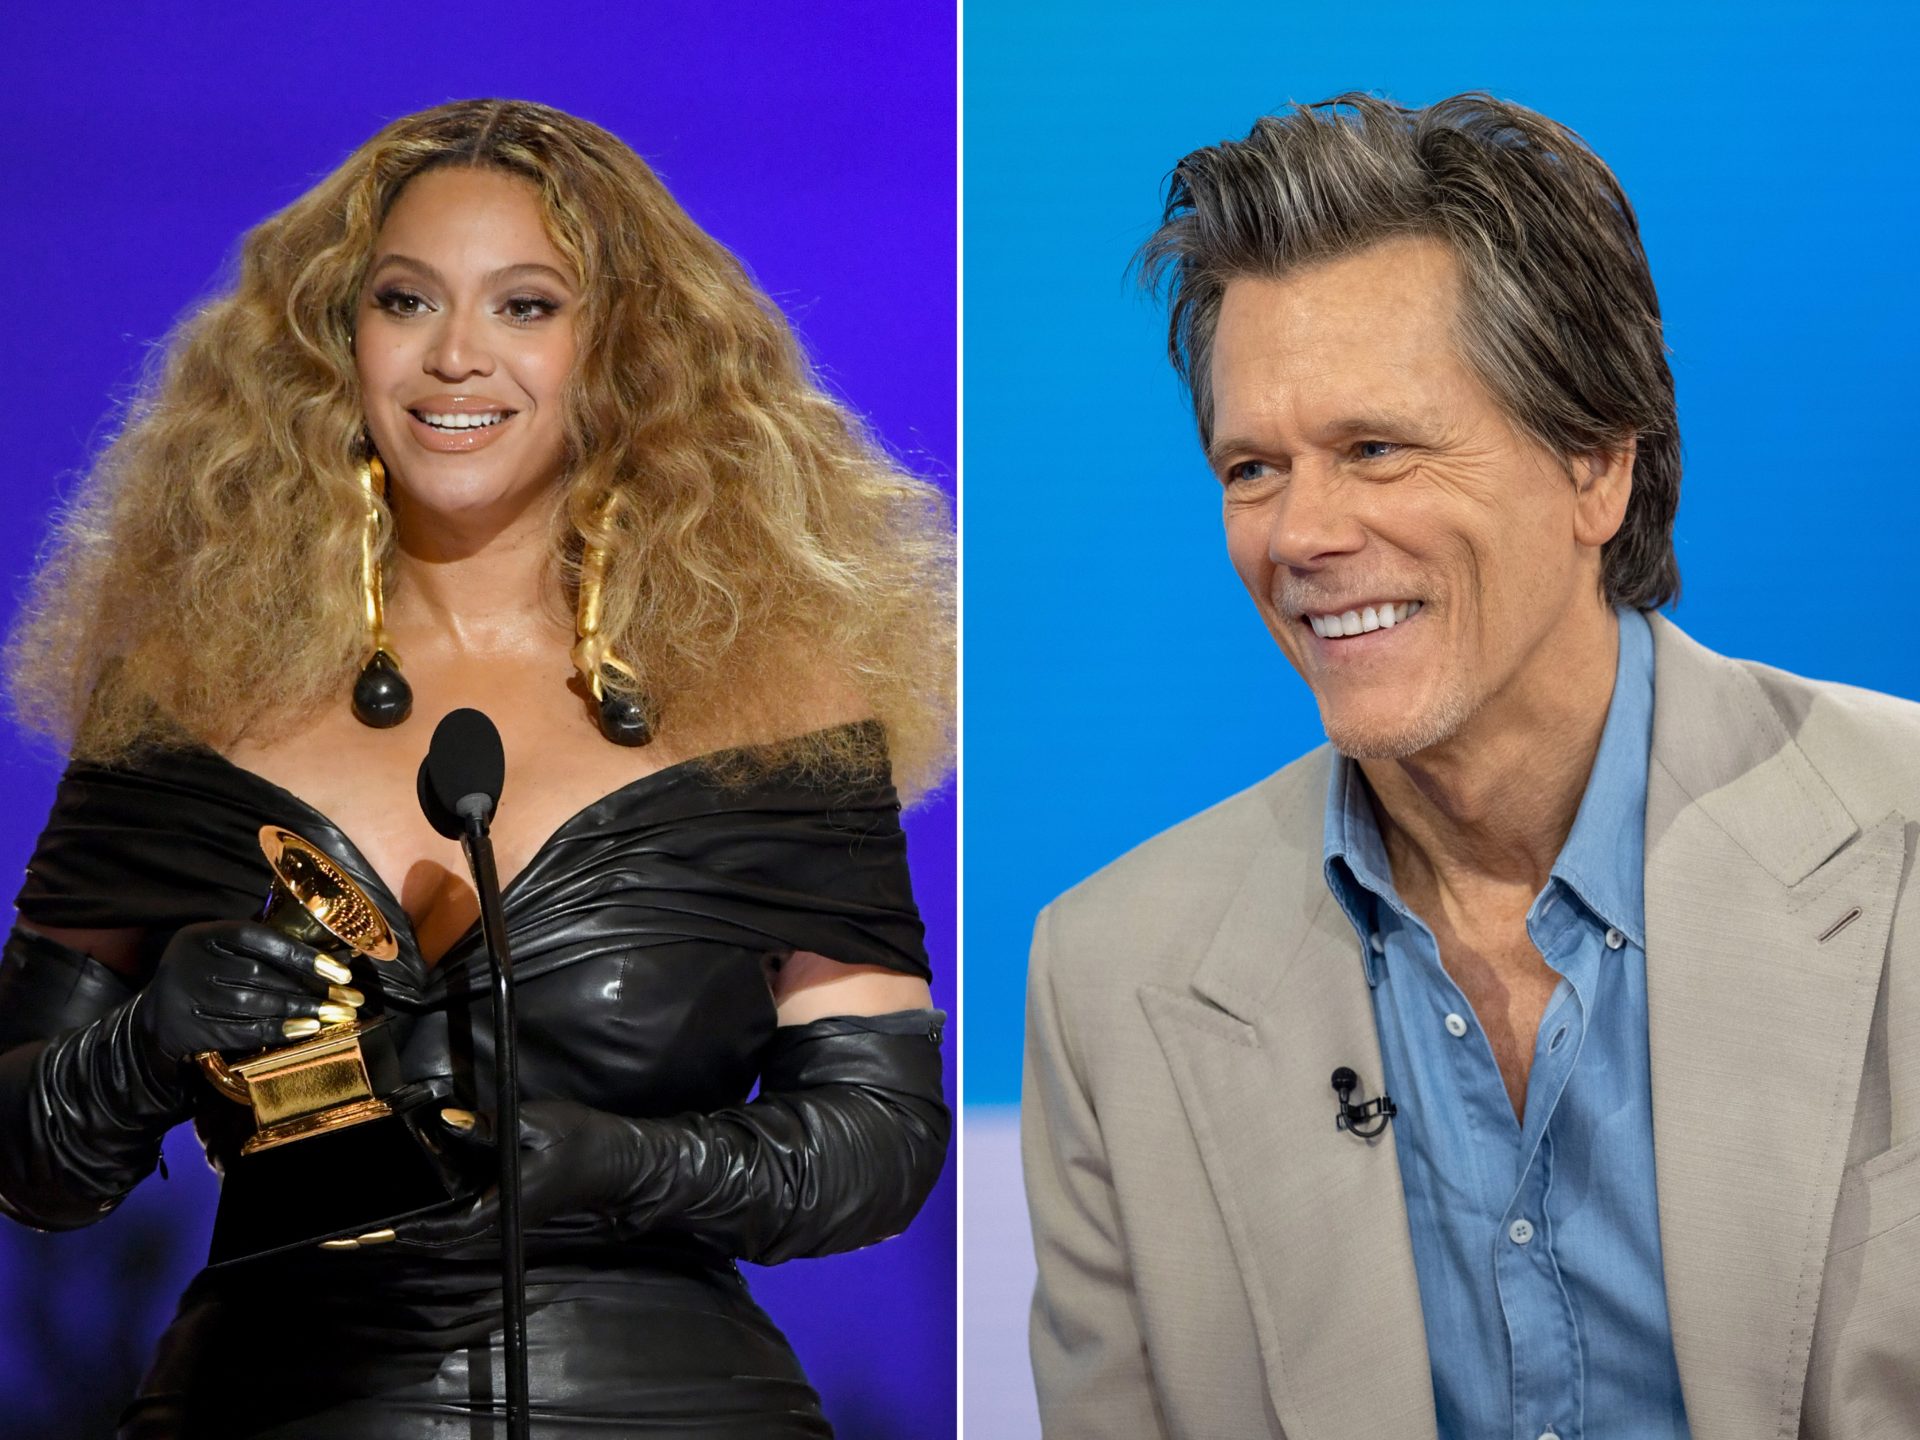 Kevin Bacon shares a video of him doing a cover to Beyoncé's hit single "Heated," from her new album, which dropped last month.